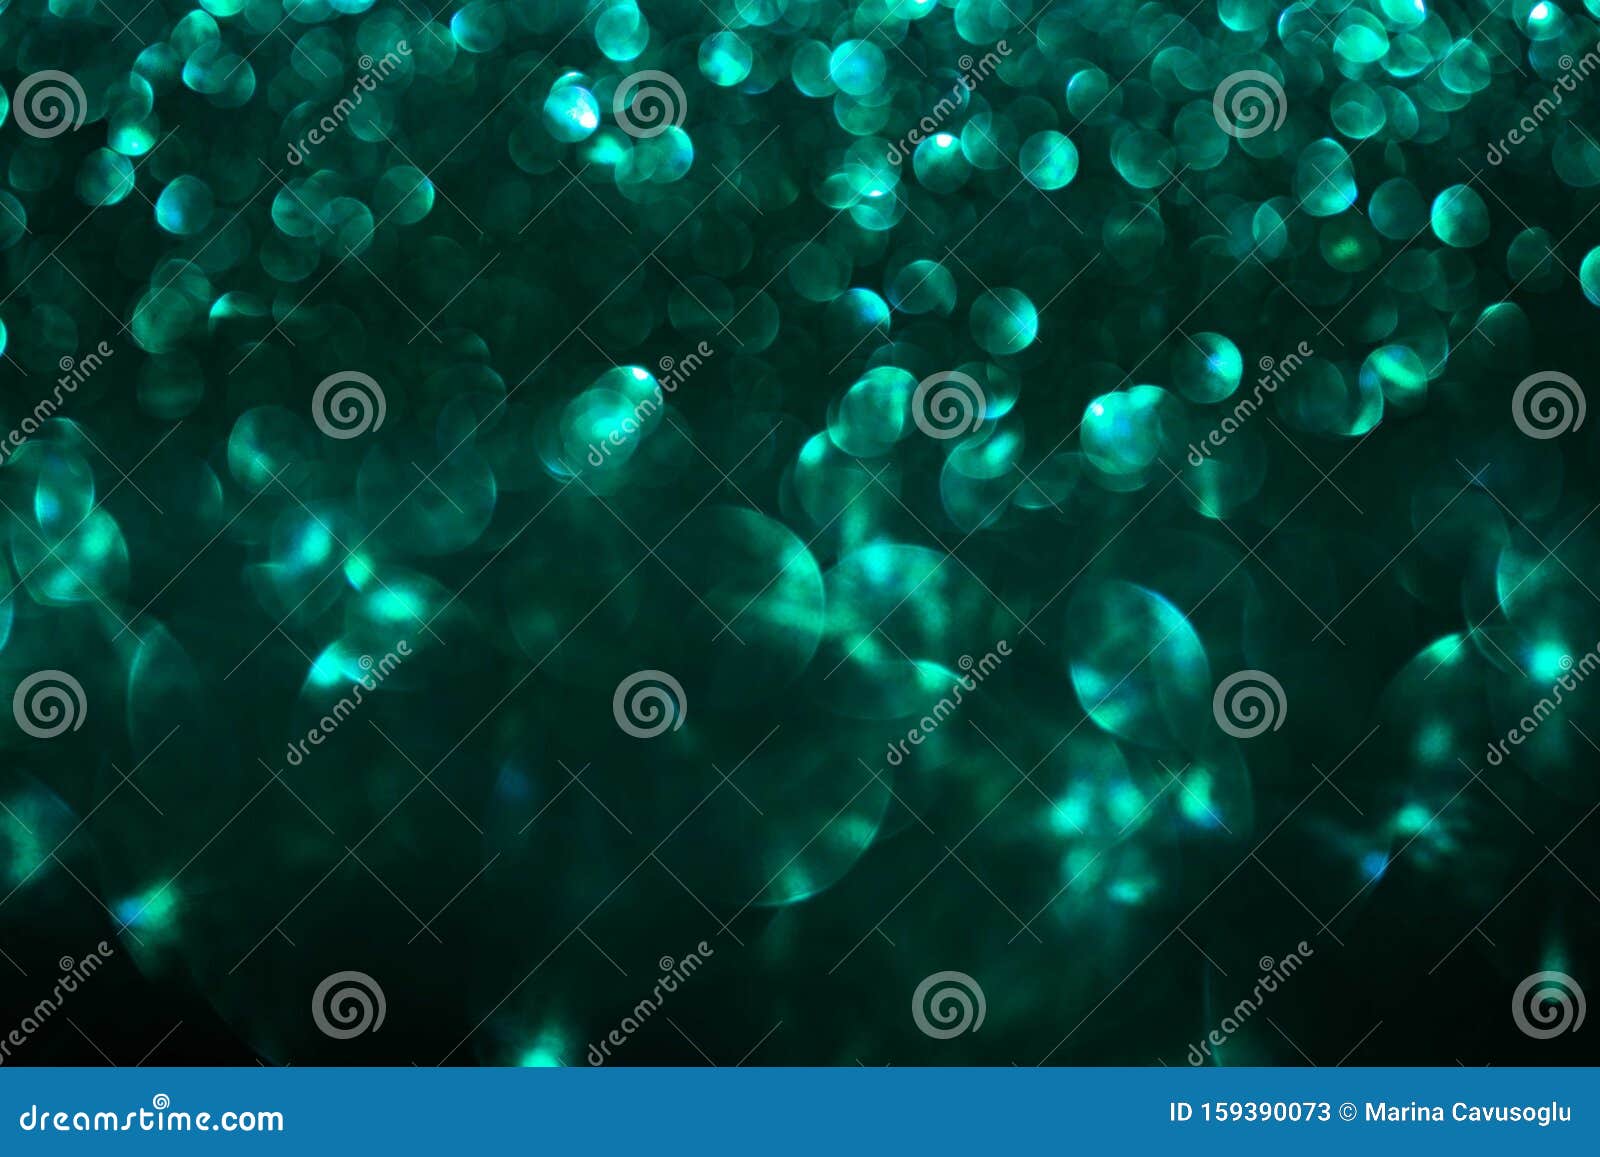 biscay turquoise green sparkles background.